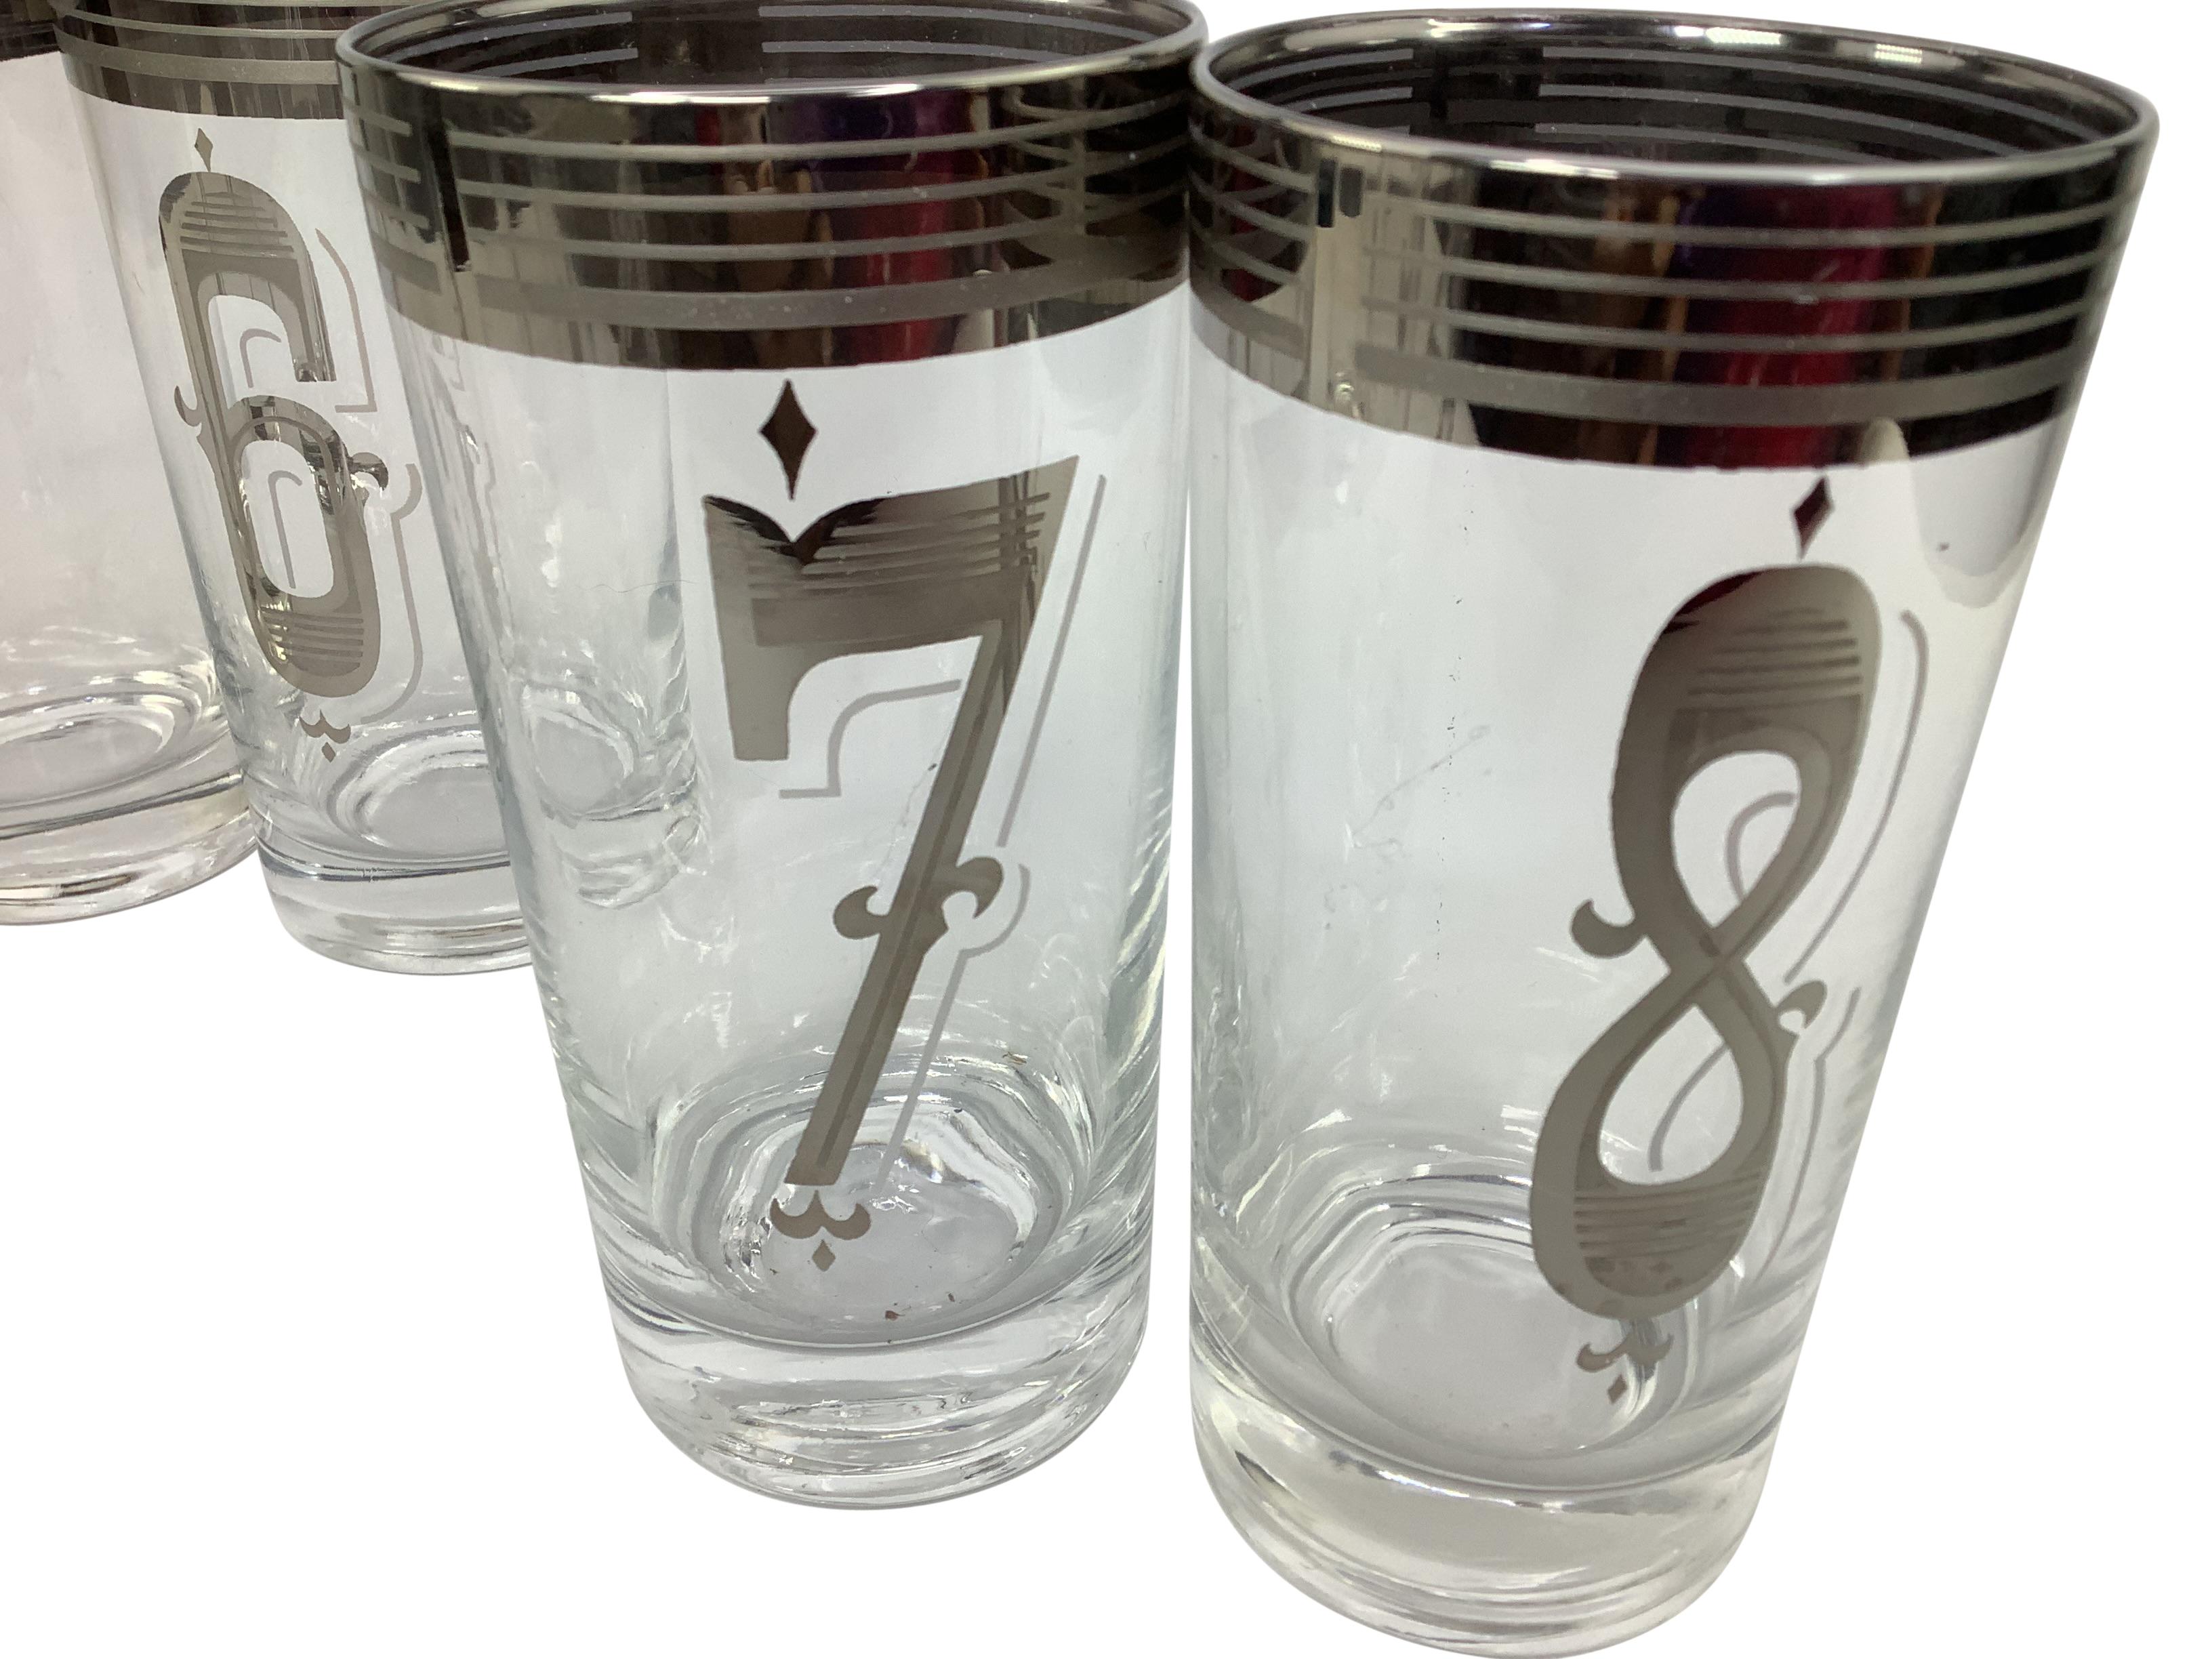 Set of 8 vintage numbered highball cocktail glasses with silvered band. Glasses are 5 1/2